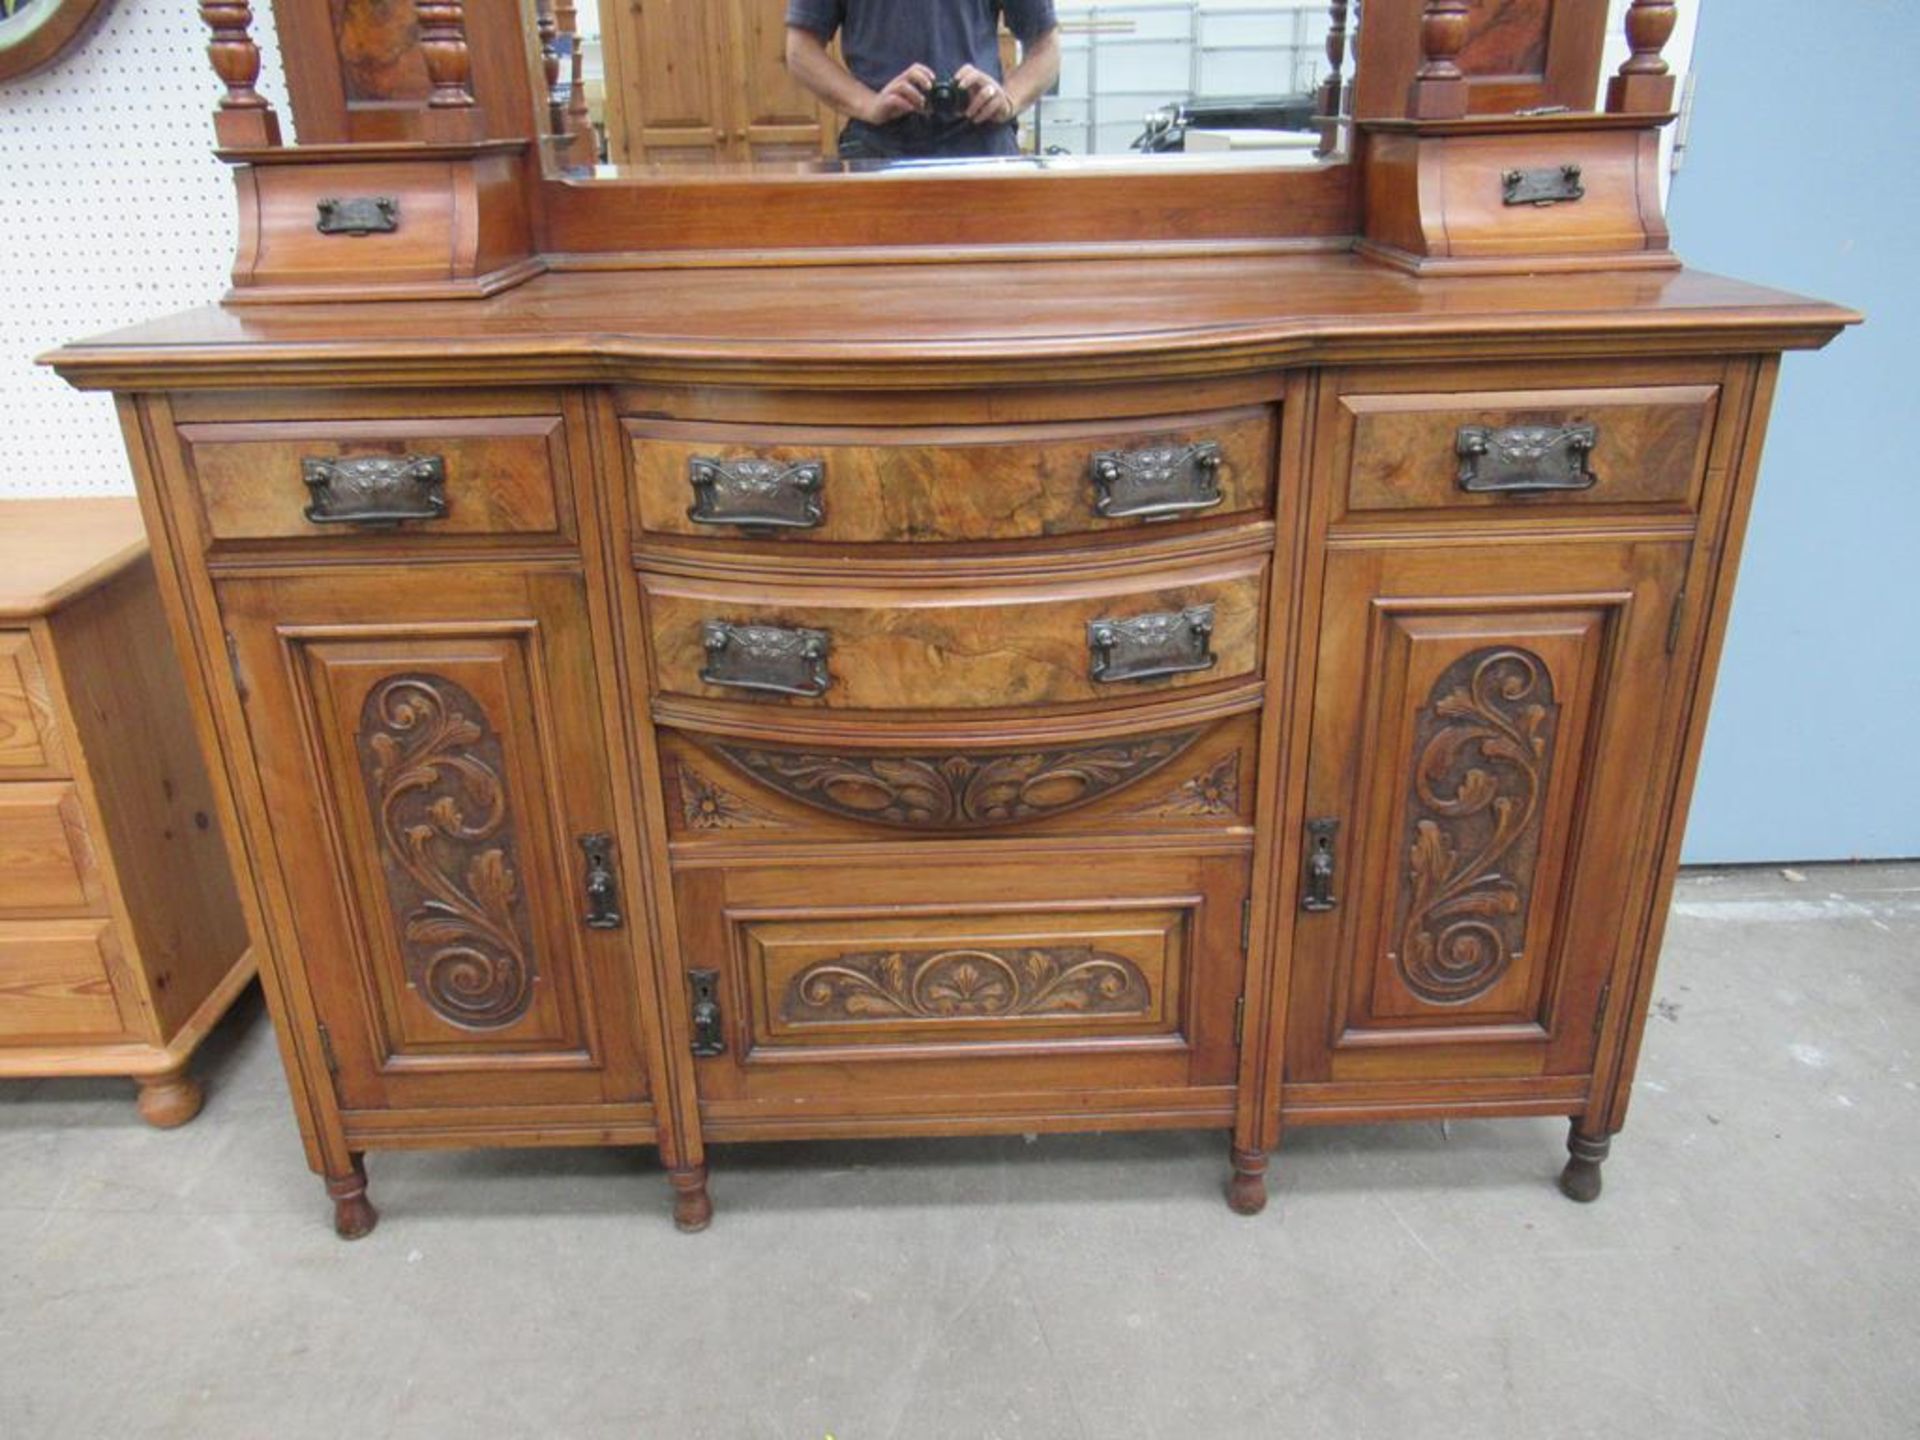 Detailed Early Four drawer, Three Door Mirror Backed Sideboard with Inlaid Walnut Panels - Image 3 of 4